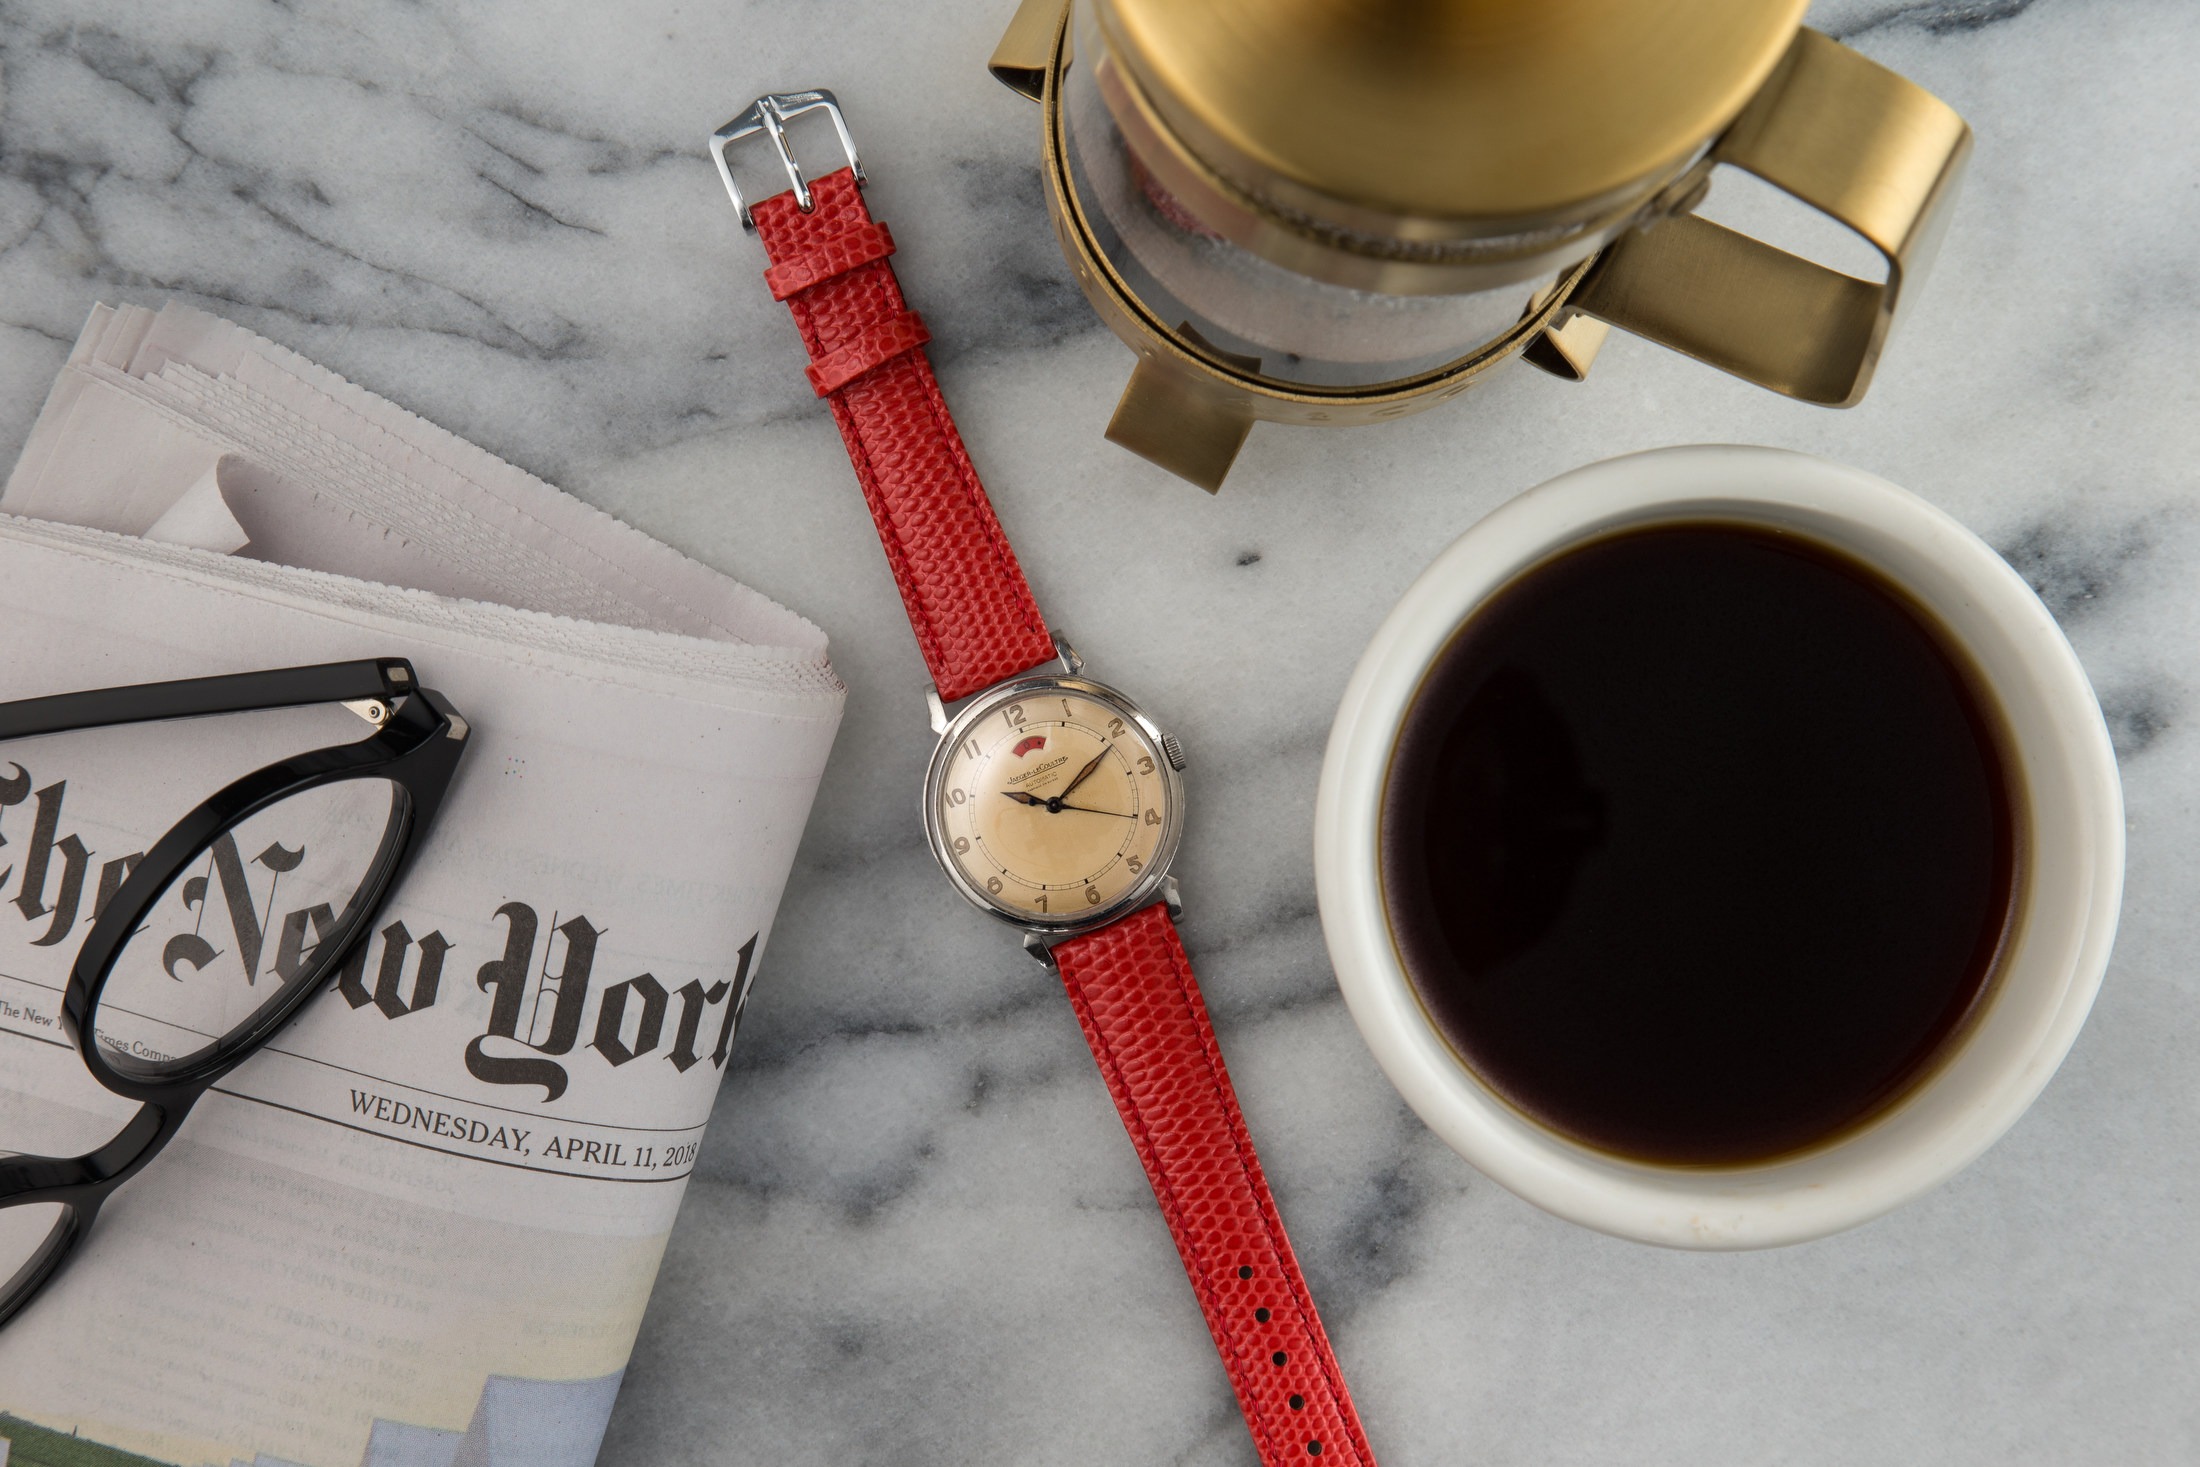 Flat lay photography for 15 hours Vintage watches. Scene: vintage watch with red band on marble counter top surrounded by folded New York Times newspaper, cup of coffee and coffee press.